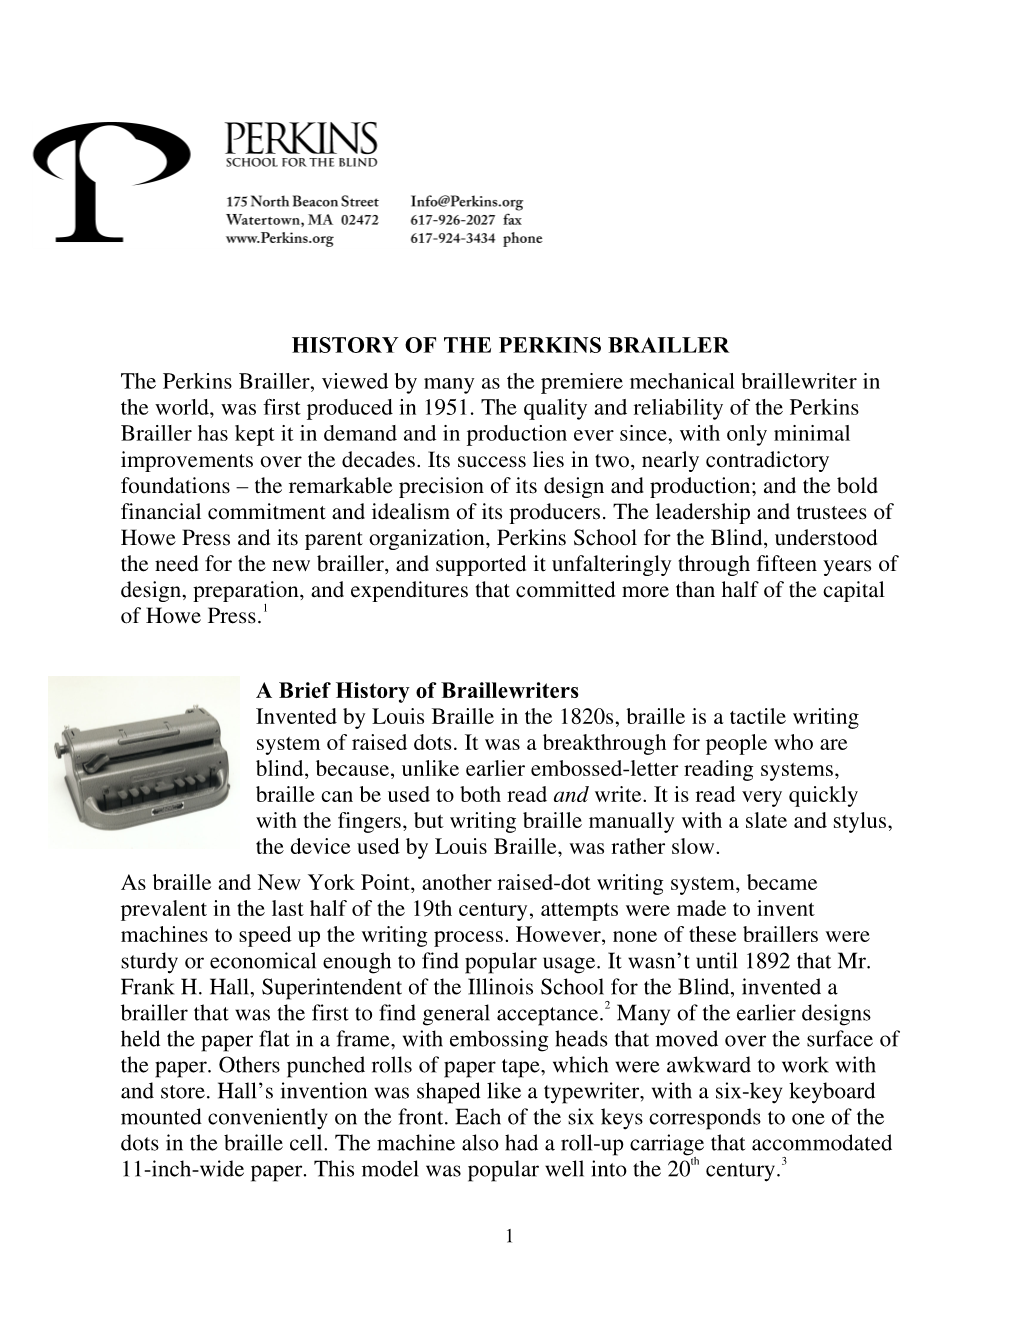 HISTORY of the PERKINS BRAILLER the Perkins Brailler, Viewed by Many As the Premiere Mechanical Braillewriter in the World, Was First Produced in 1951